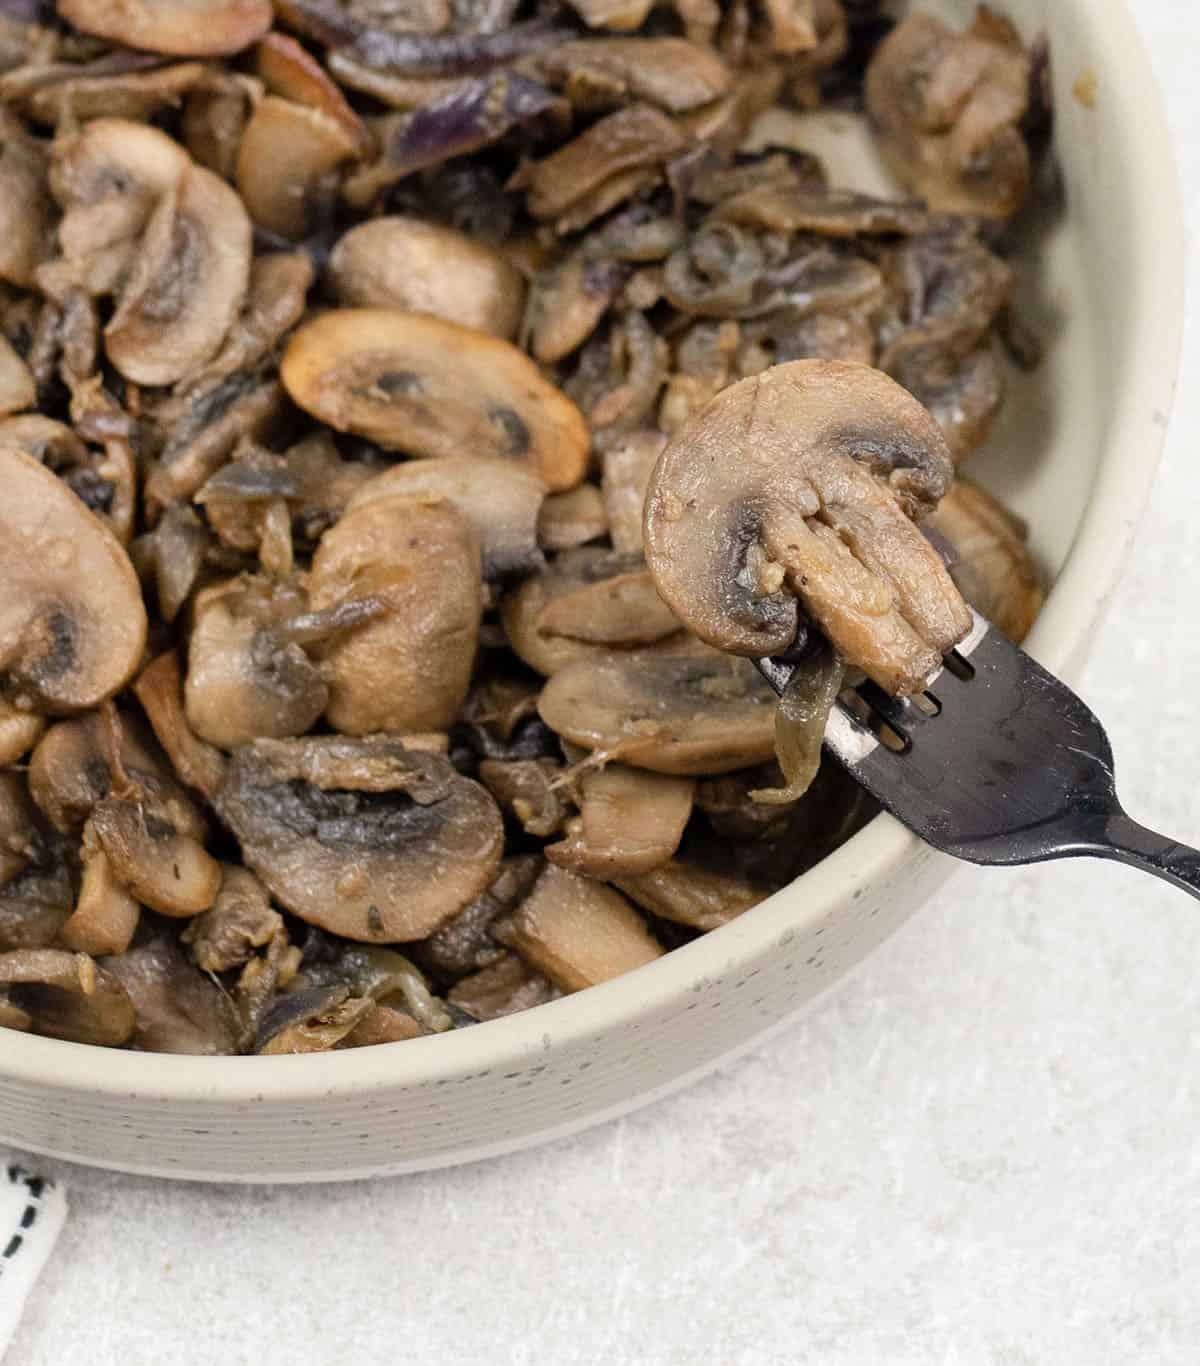 A spoonful of caramelized mushrooms and onions.